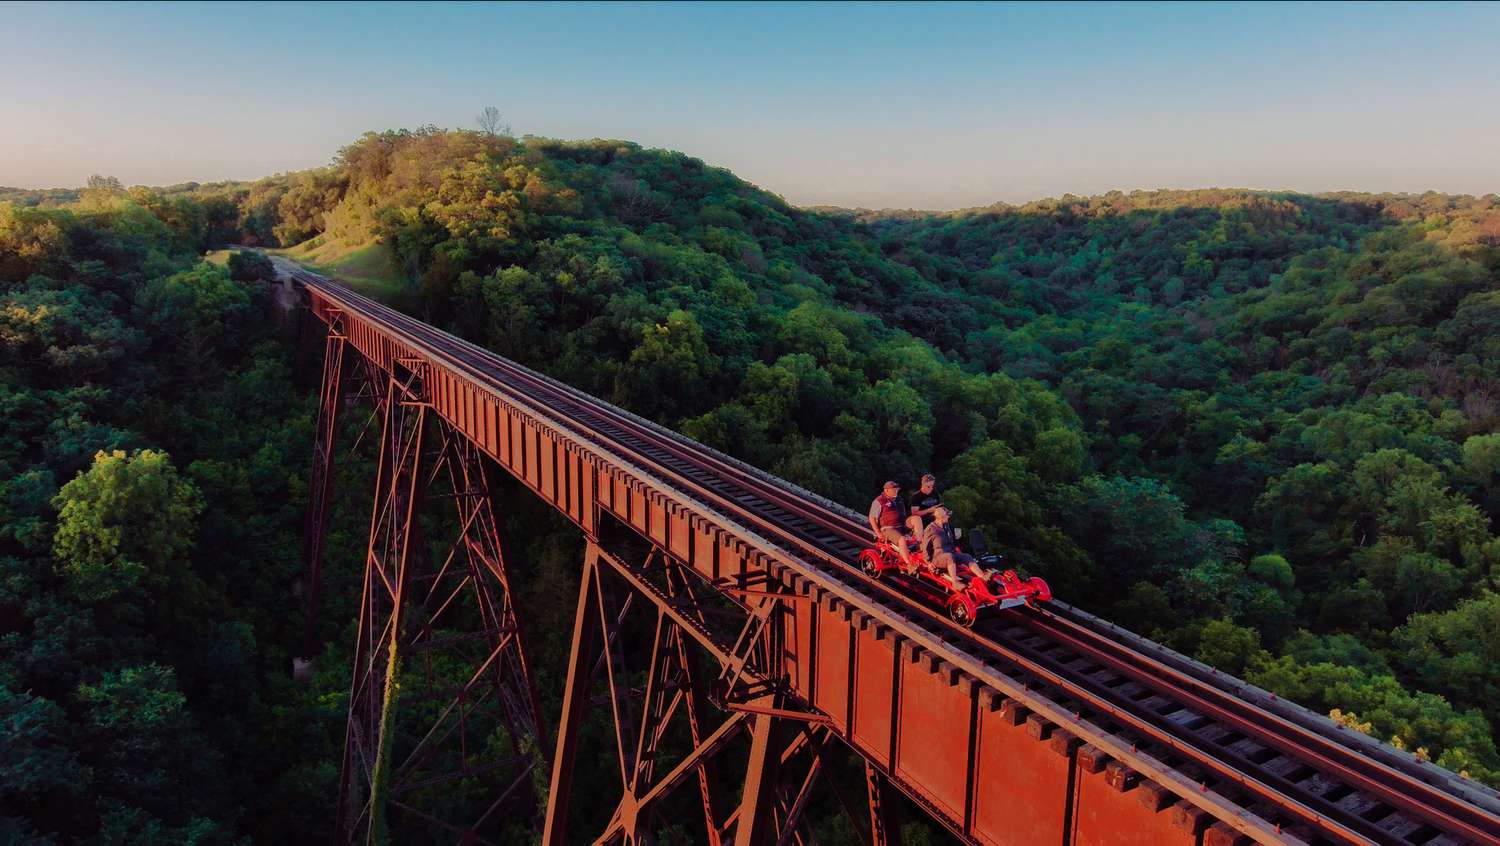 A pedal-powered car crosses a high bridge over a forested valley.